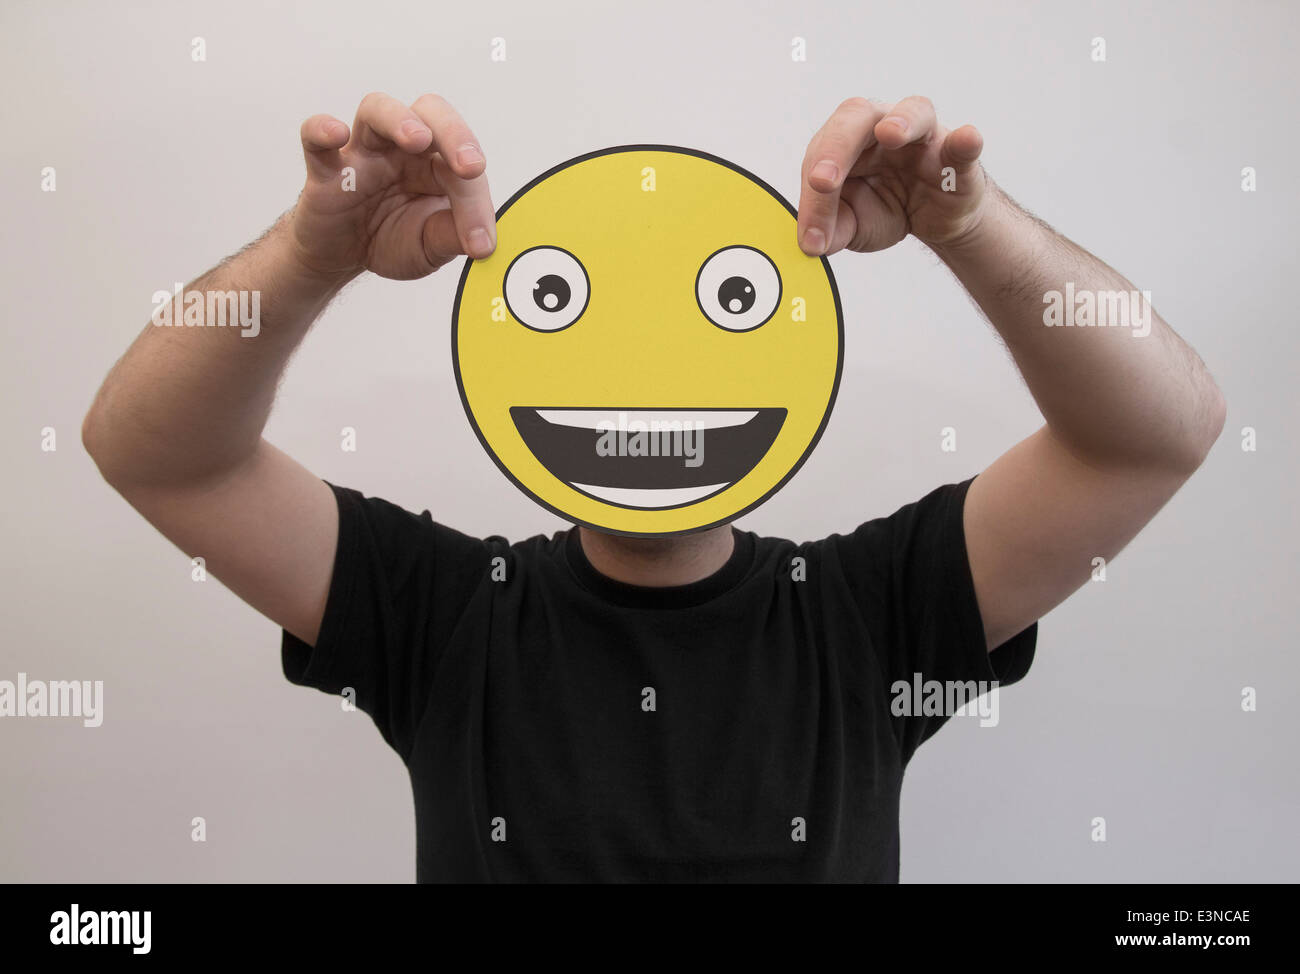 Man holding a really happy emoticon face in front of his face Stock Photo